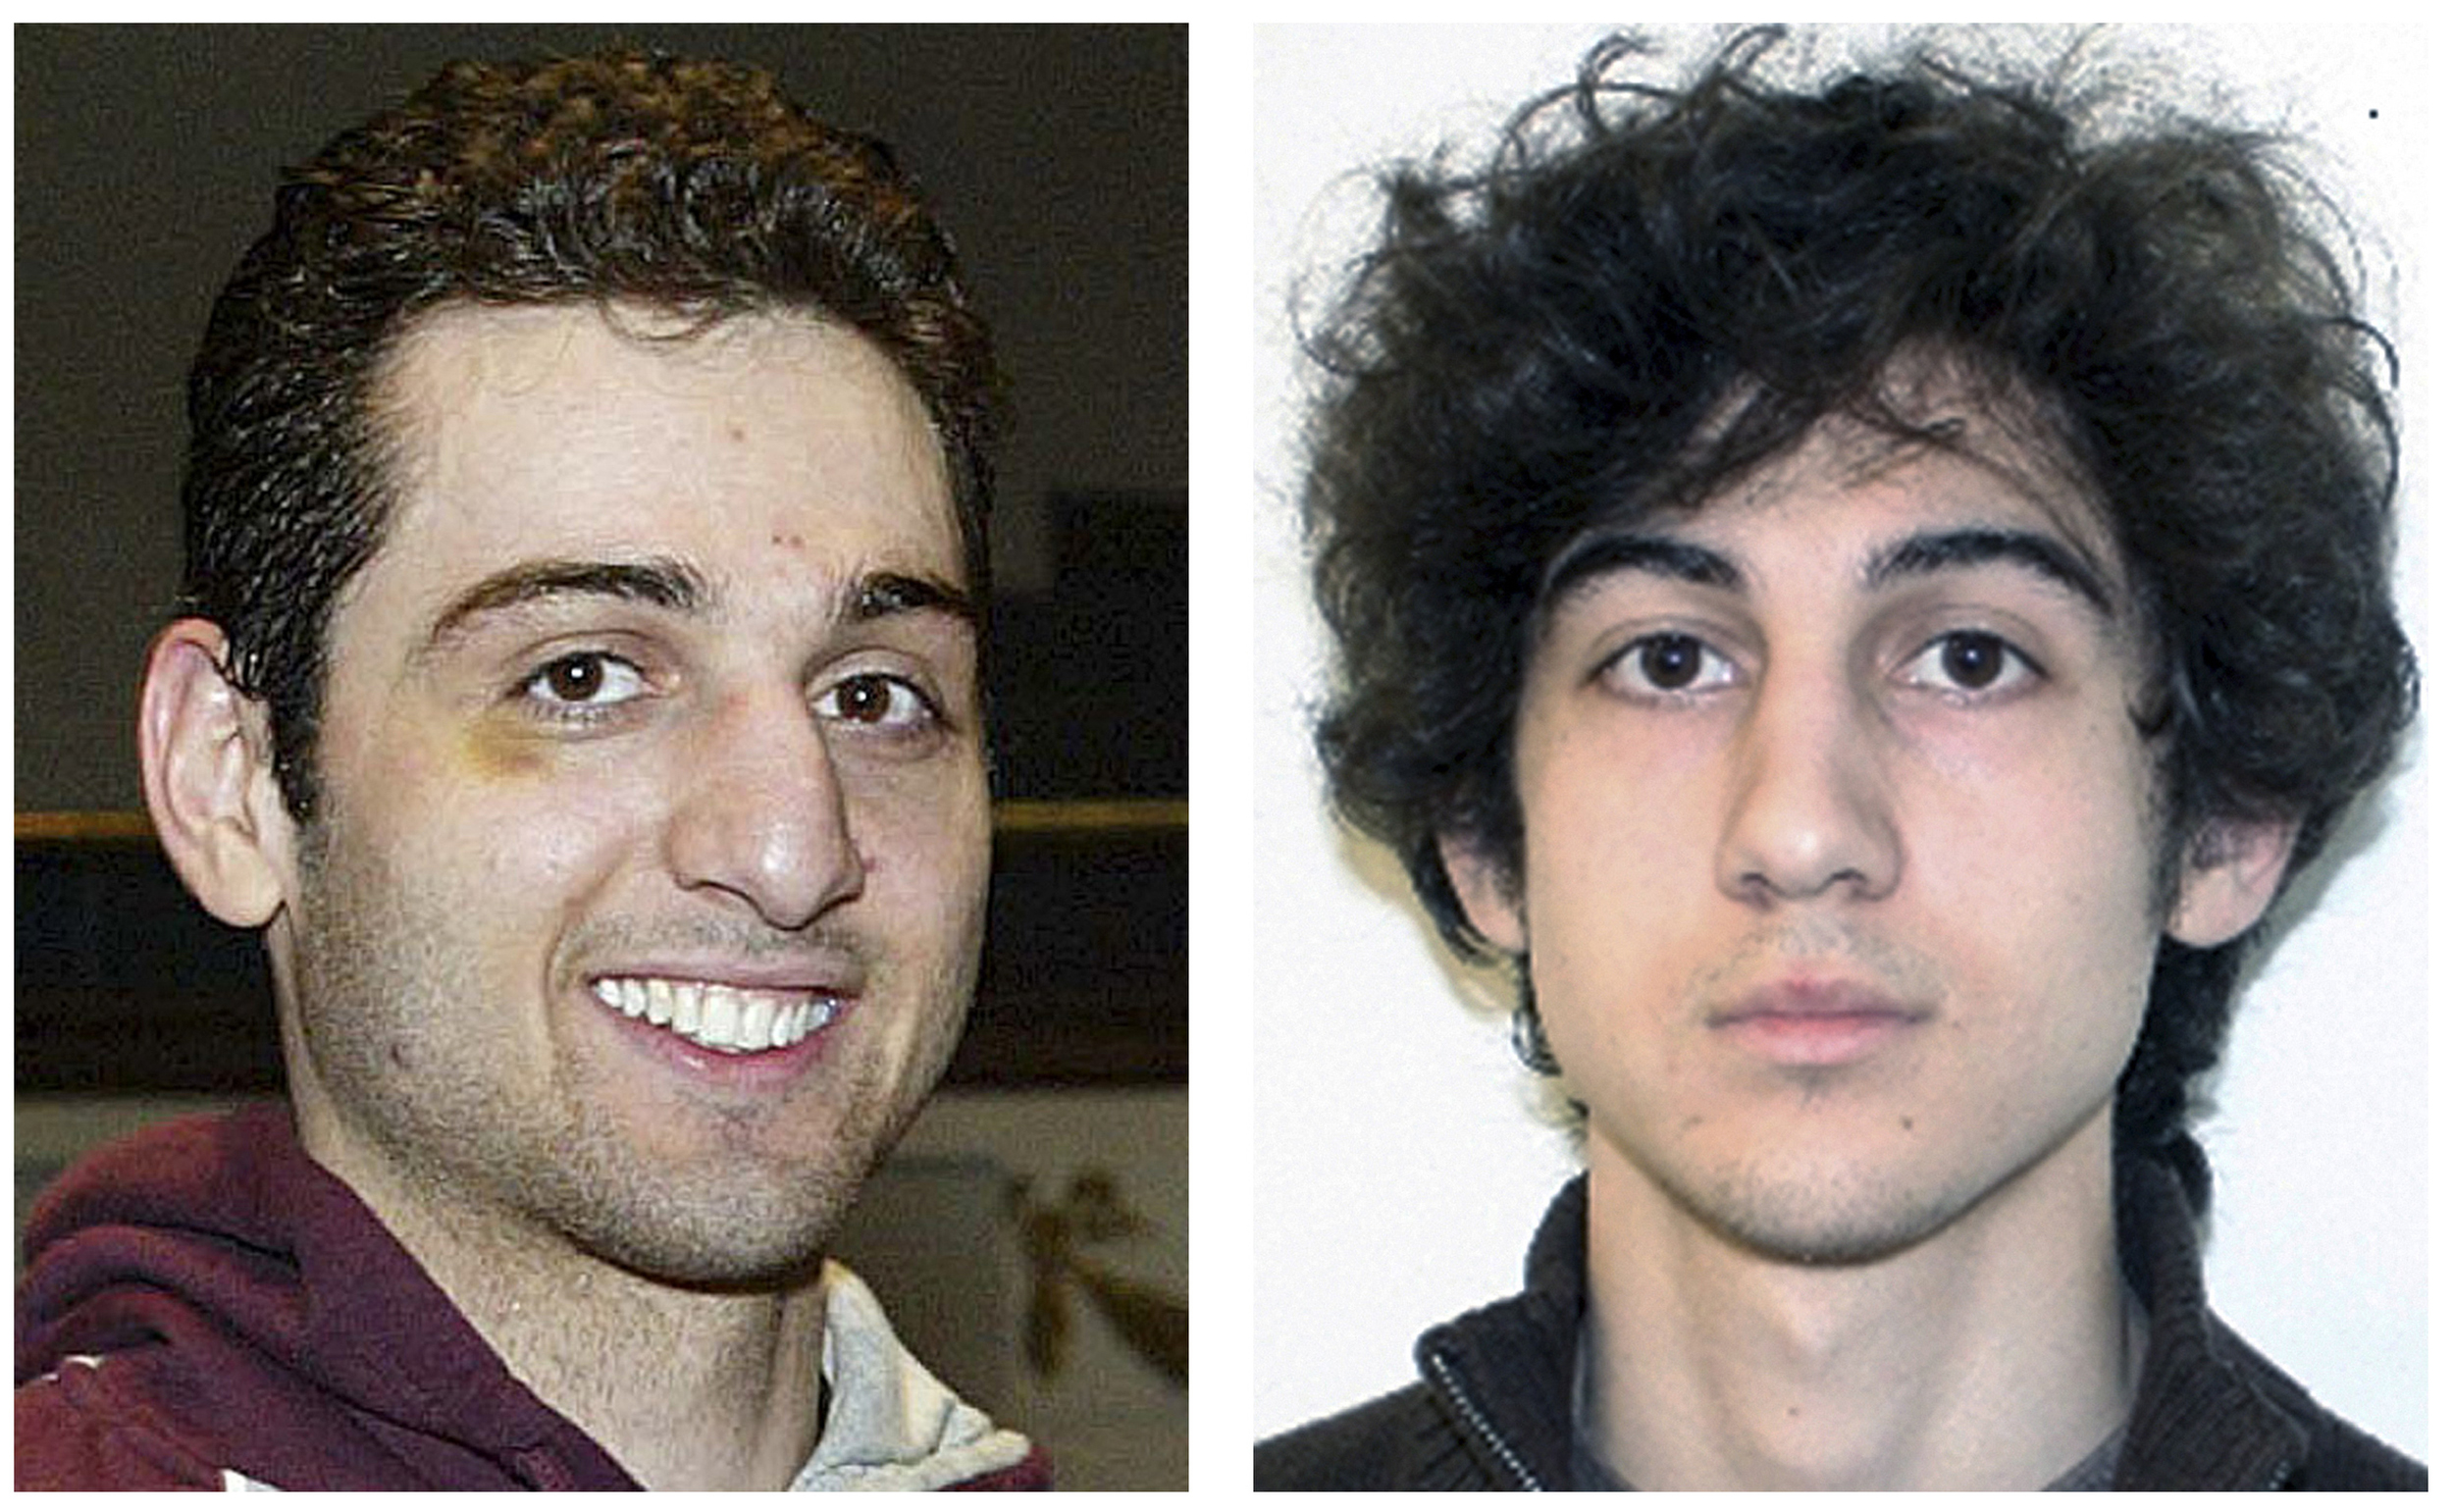 PHOTO: Tamerlan, left, and Dzhokhar Tsarnaev, brothers who planted bombs at the finish line of the Boston Marathon on April 15, 2013.  